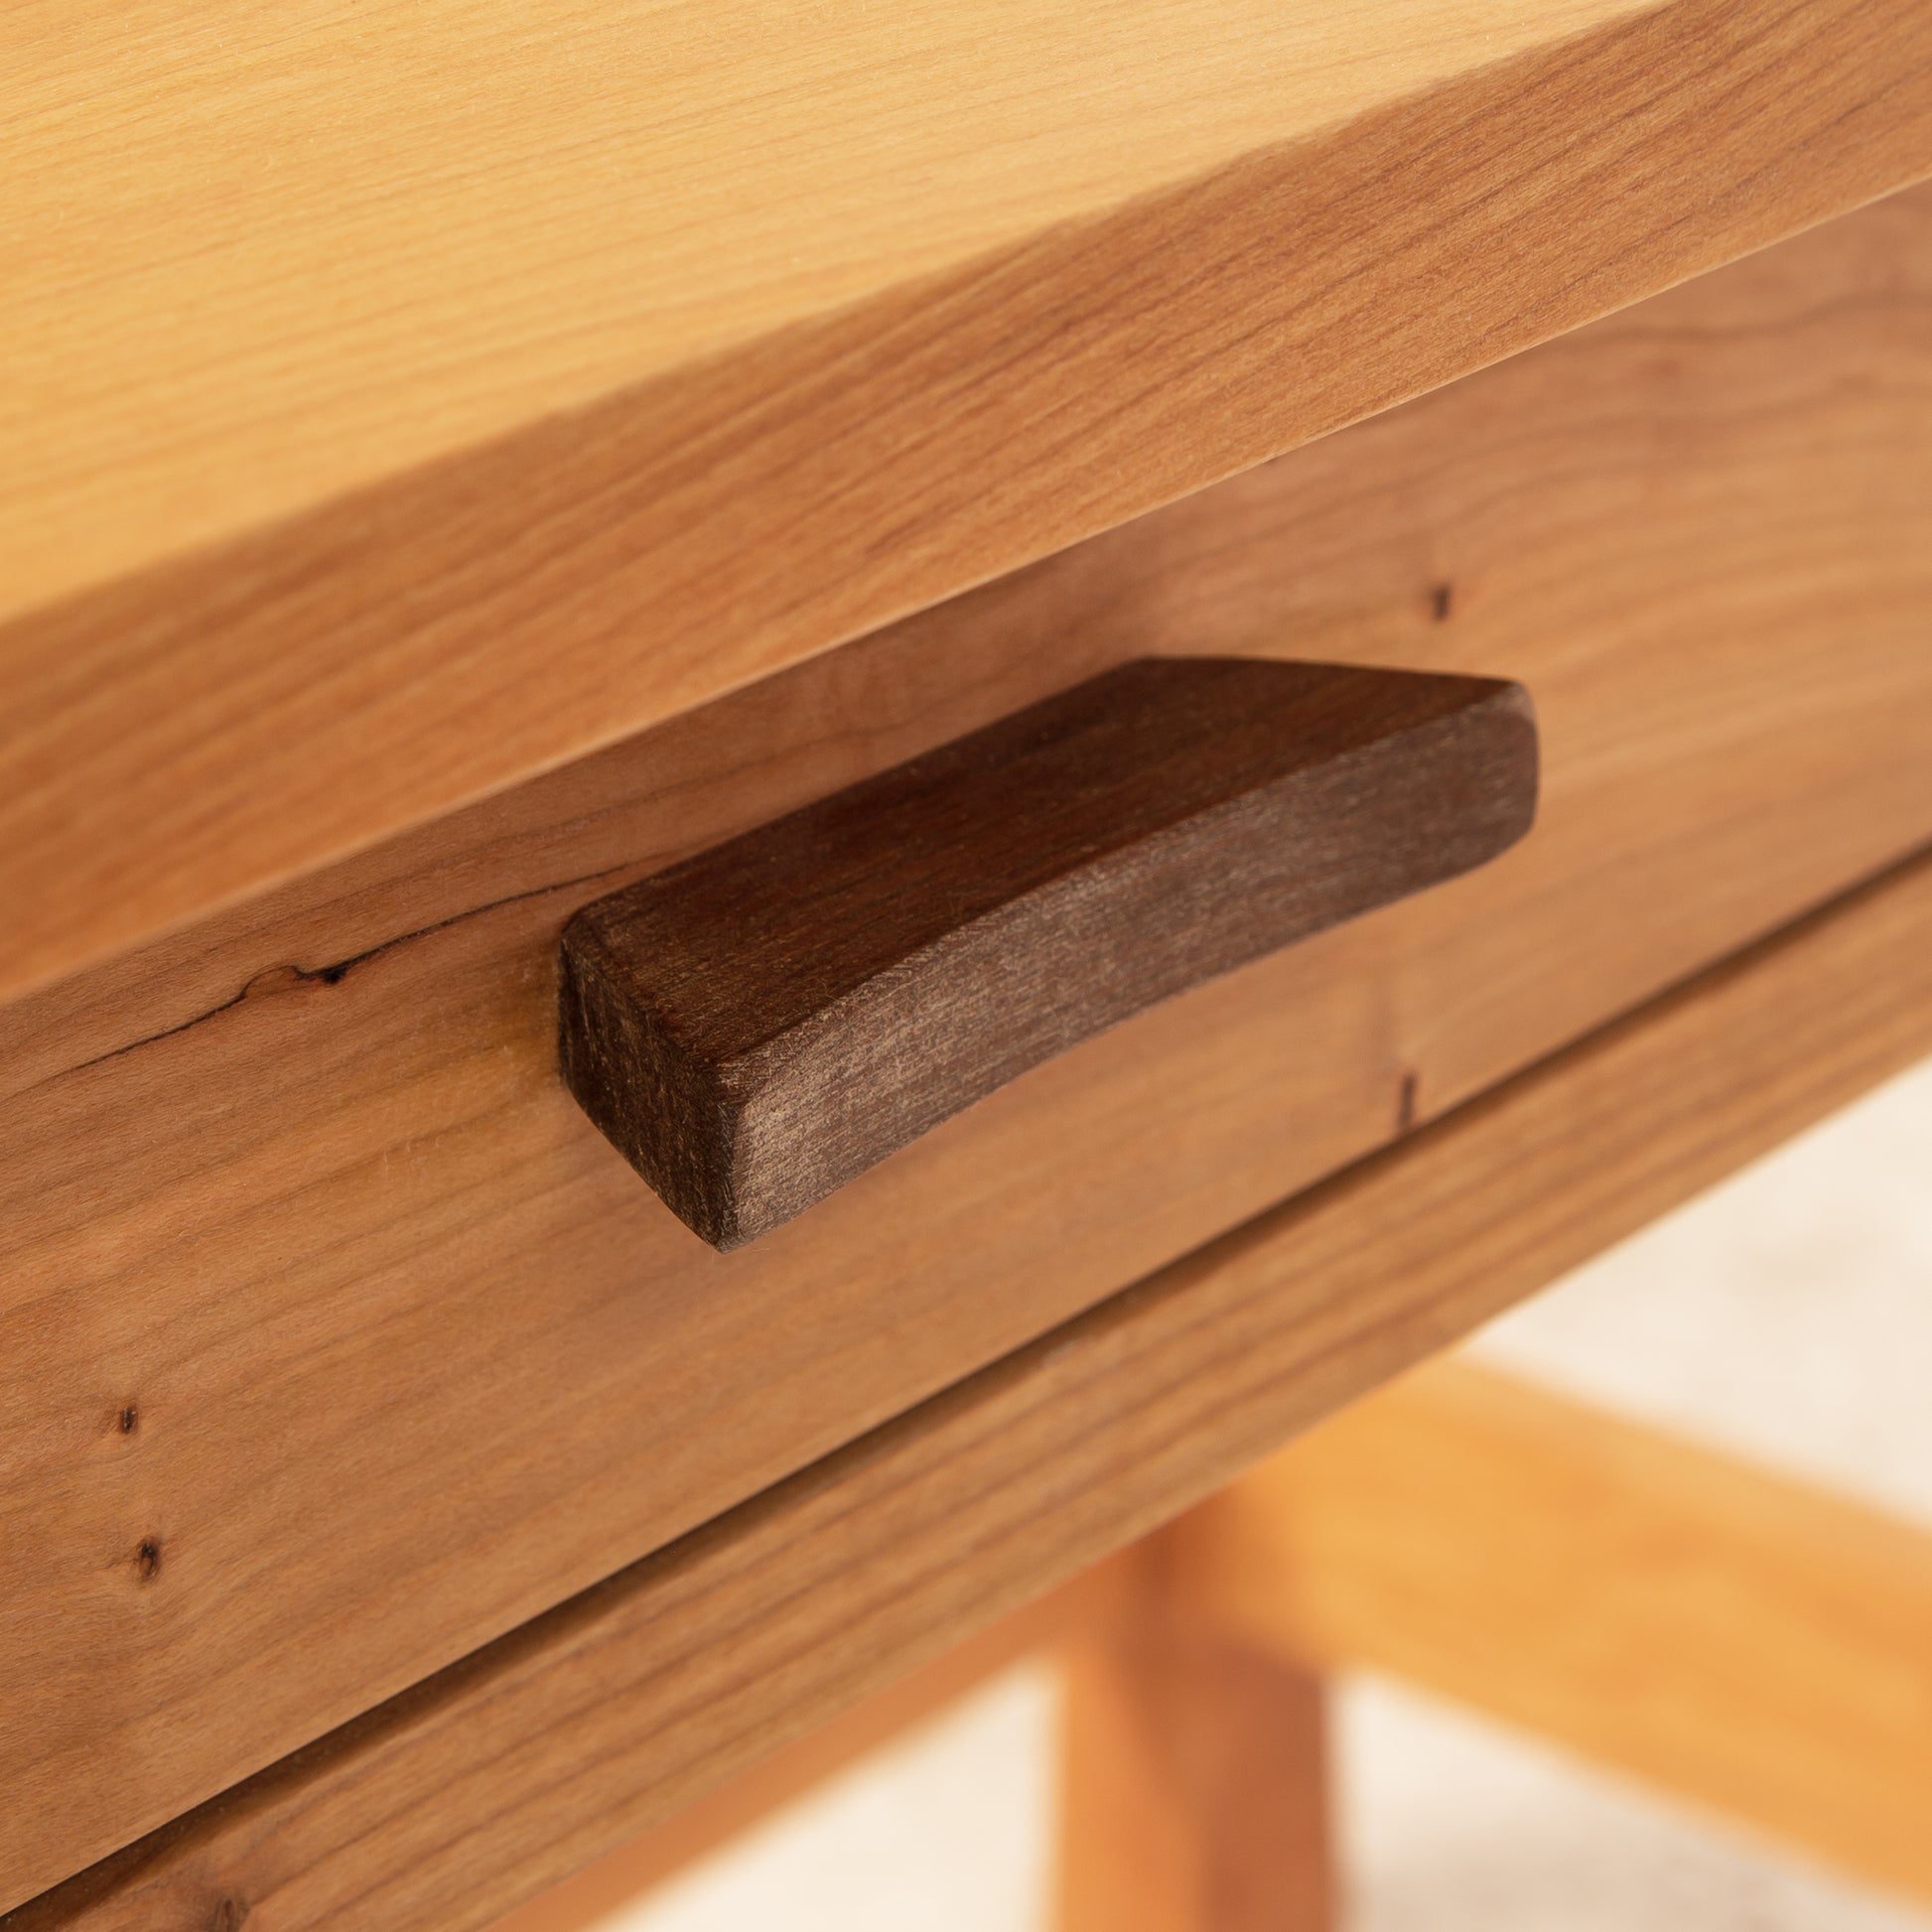 A close-up image of a wooden drawer from a Vermont Furniture Designs Contemporary Craftsman Writing Desk, with a simple, rectangular pull handle featuring Arts and Crafts styling.